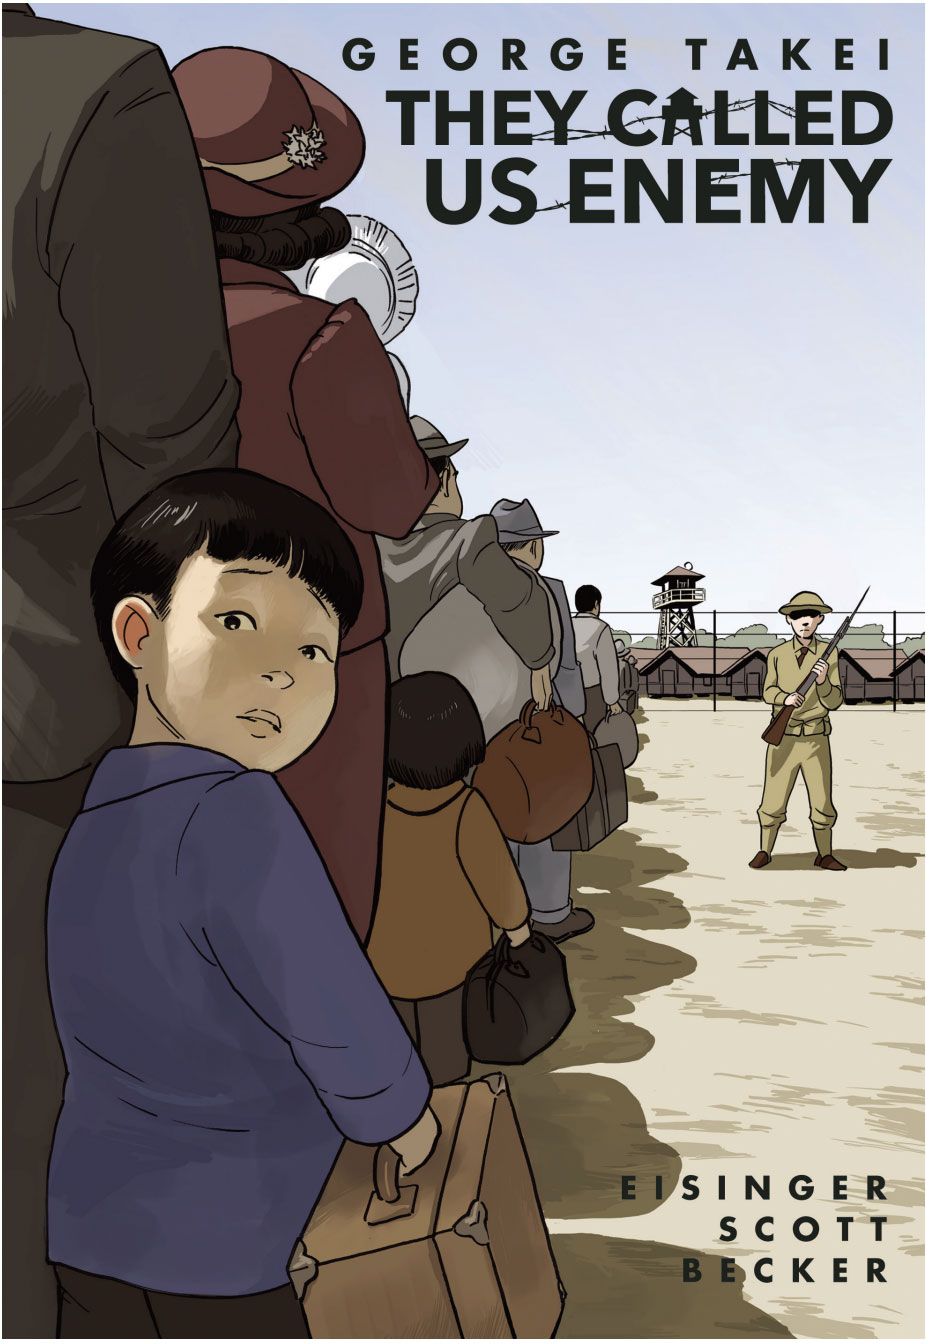 They Called Us Enemy book cover - small boy is in the foreground looking at the viewer while his family is being pulled towards a camp by a soldier